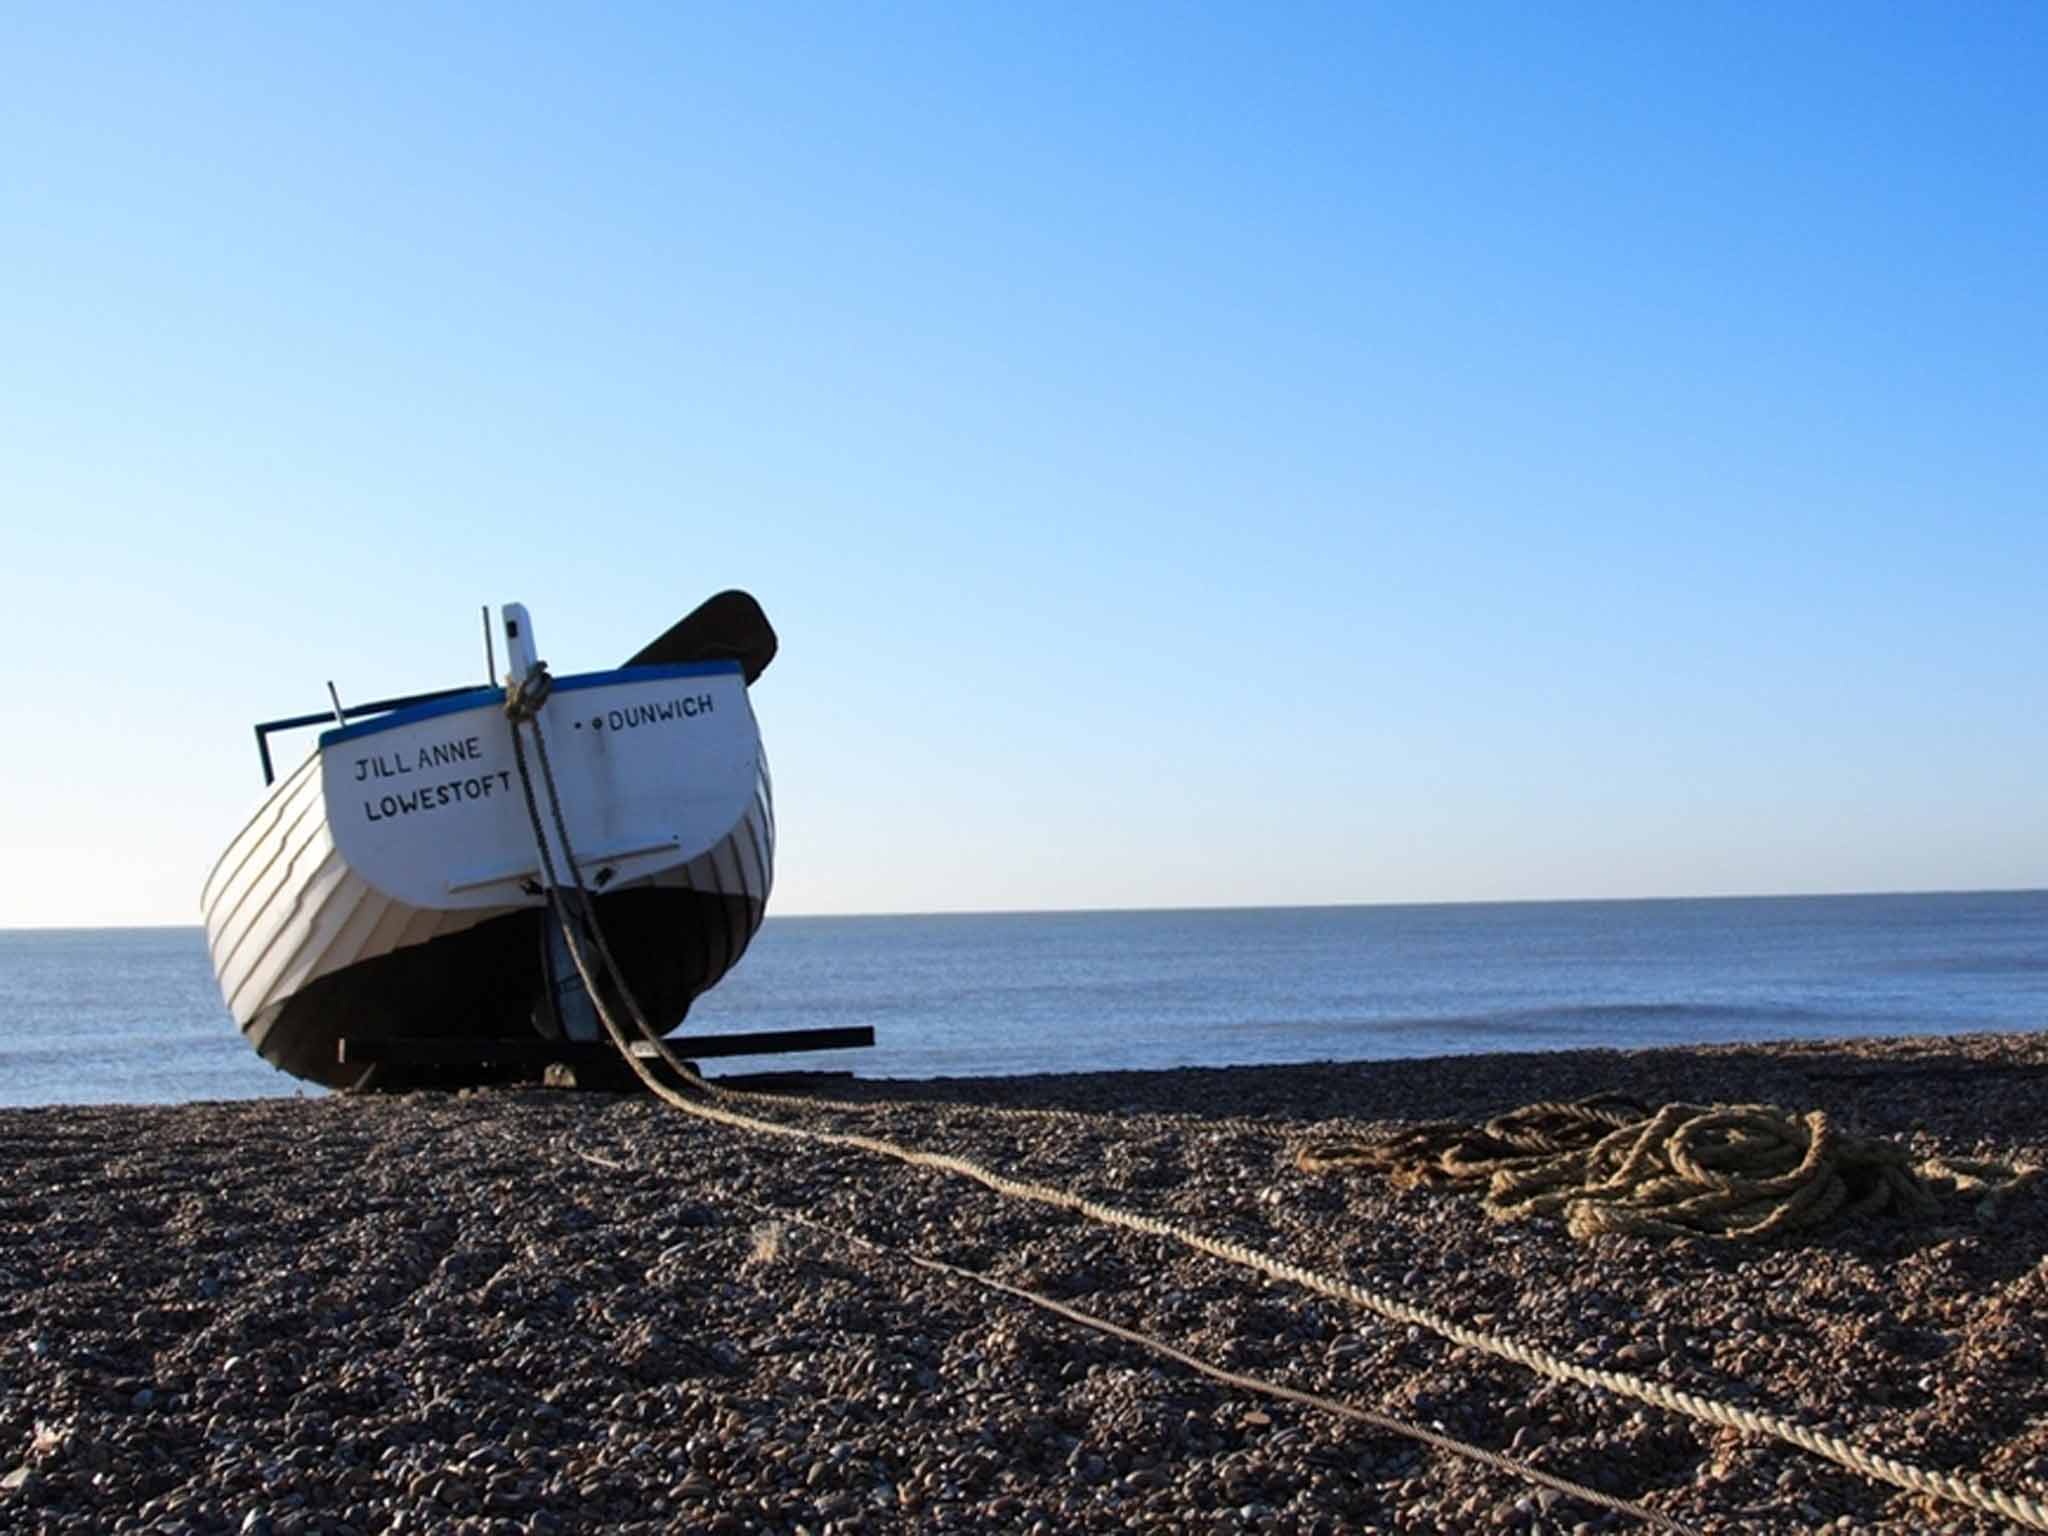 Dunwich: Its museum tells the story of this once-great port